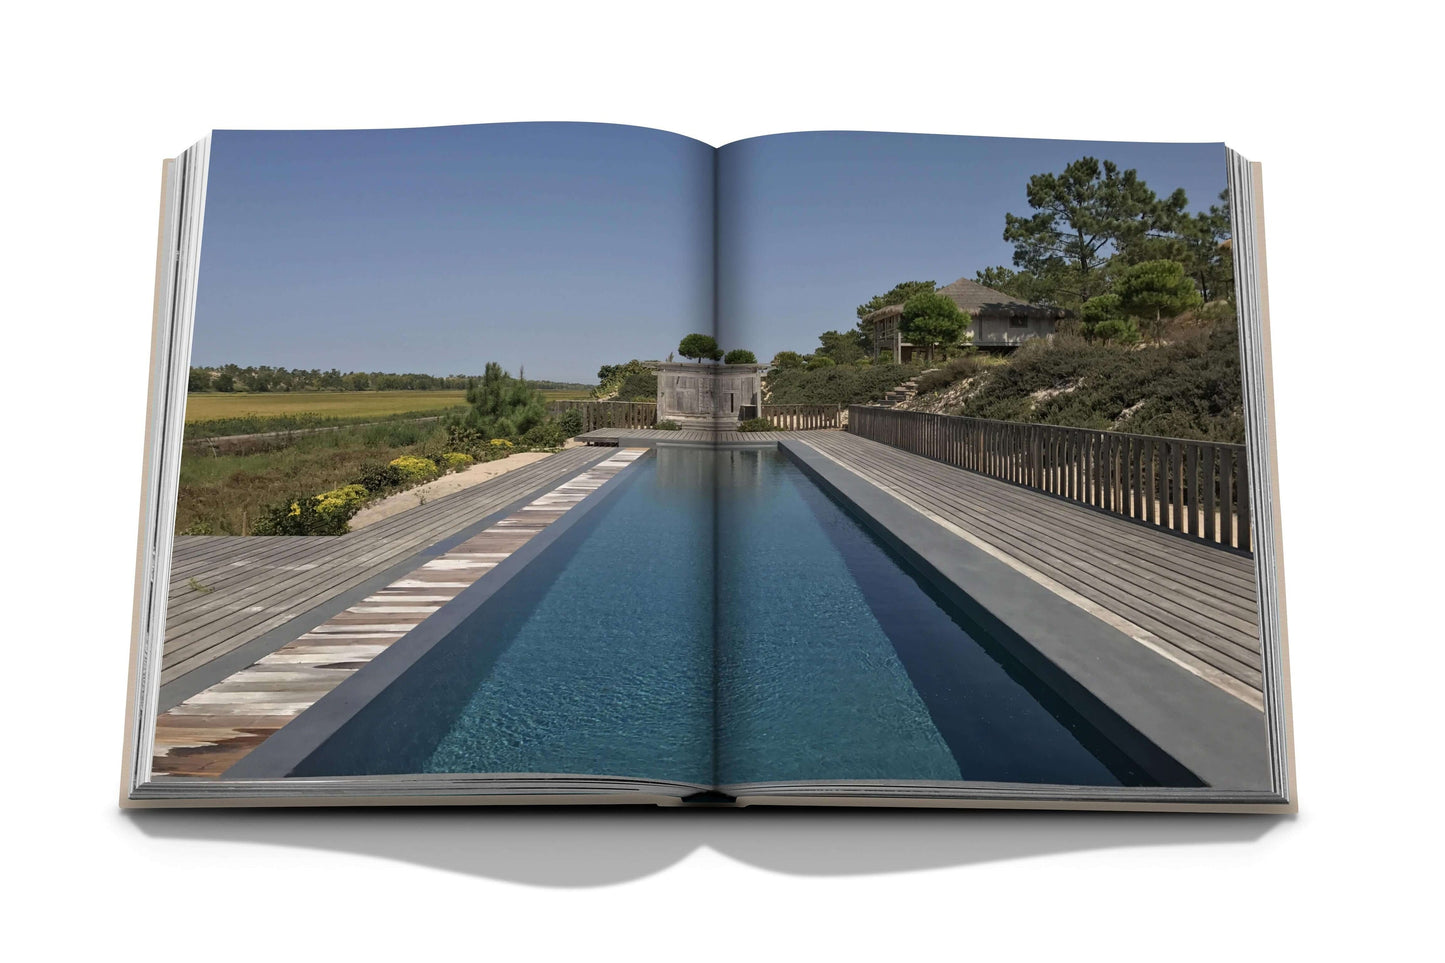 COMPORTA BLISS COFFEE TABLE BOOK